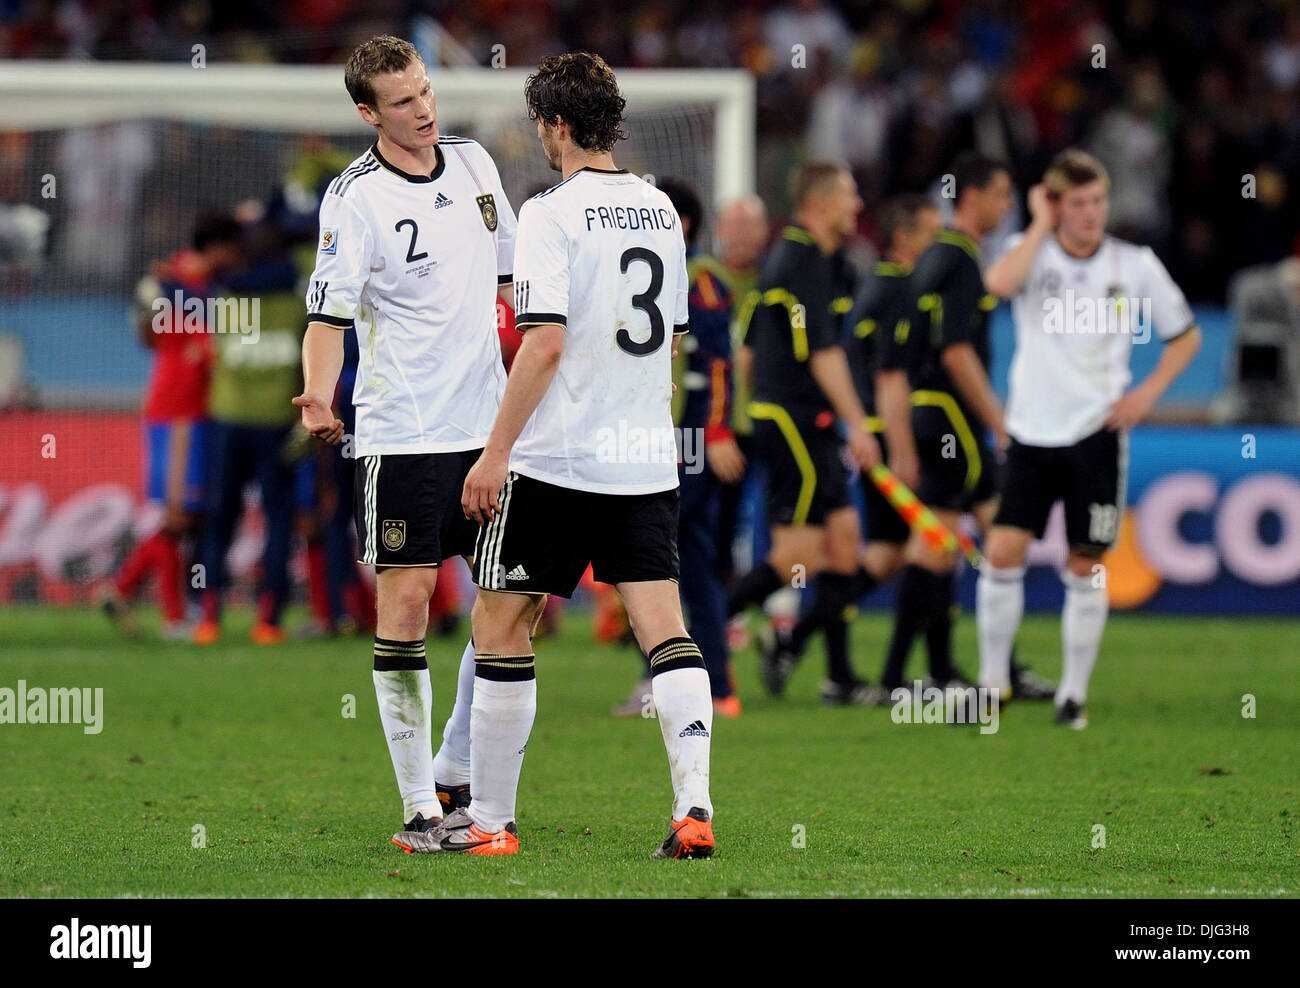 July 07, 2010 - Durban, South Africa - Marcell Jansen of Germany speaks with Arne Friedrich after the 2010 FIFA World Cup Semi Final soccer match between Germany and Spain at Princess Magogo Stadium on July 7, 2010 in Durban, South Africa. (Credit Image: © Luca Ghidoni/ZUMApress.com) Stock Photo